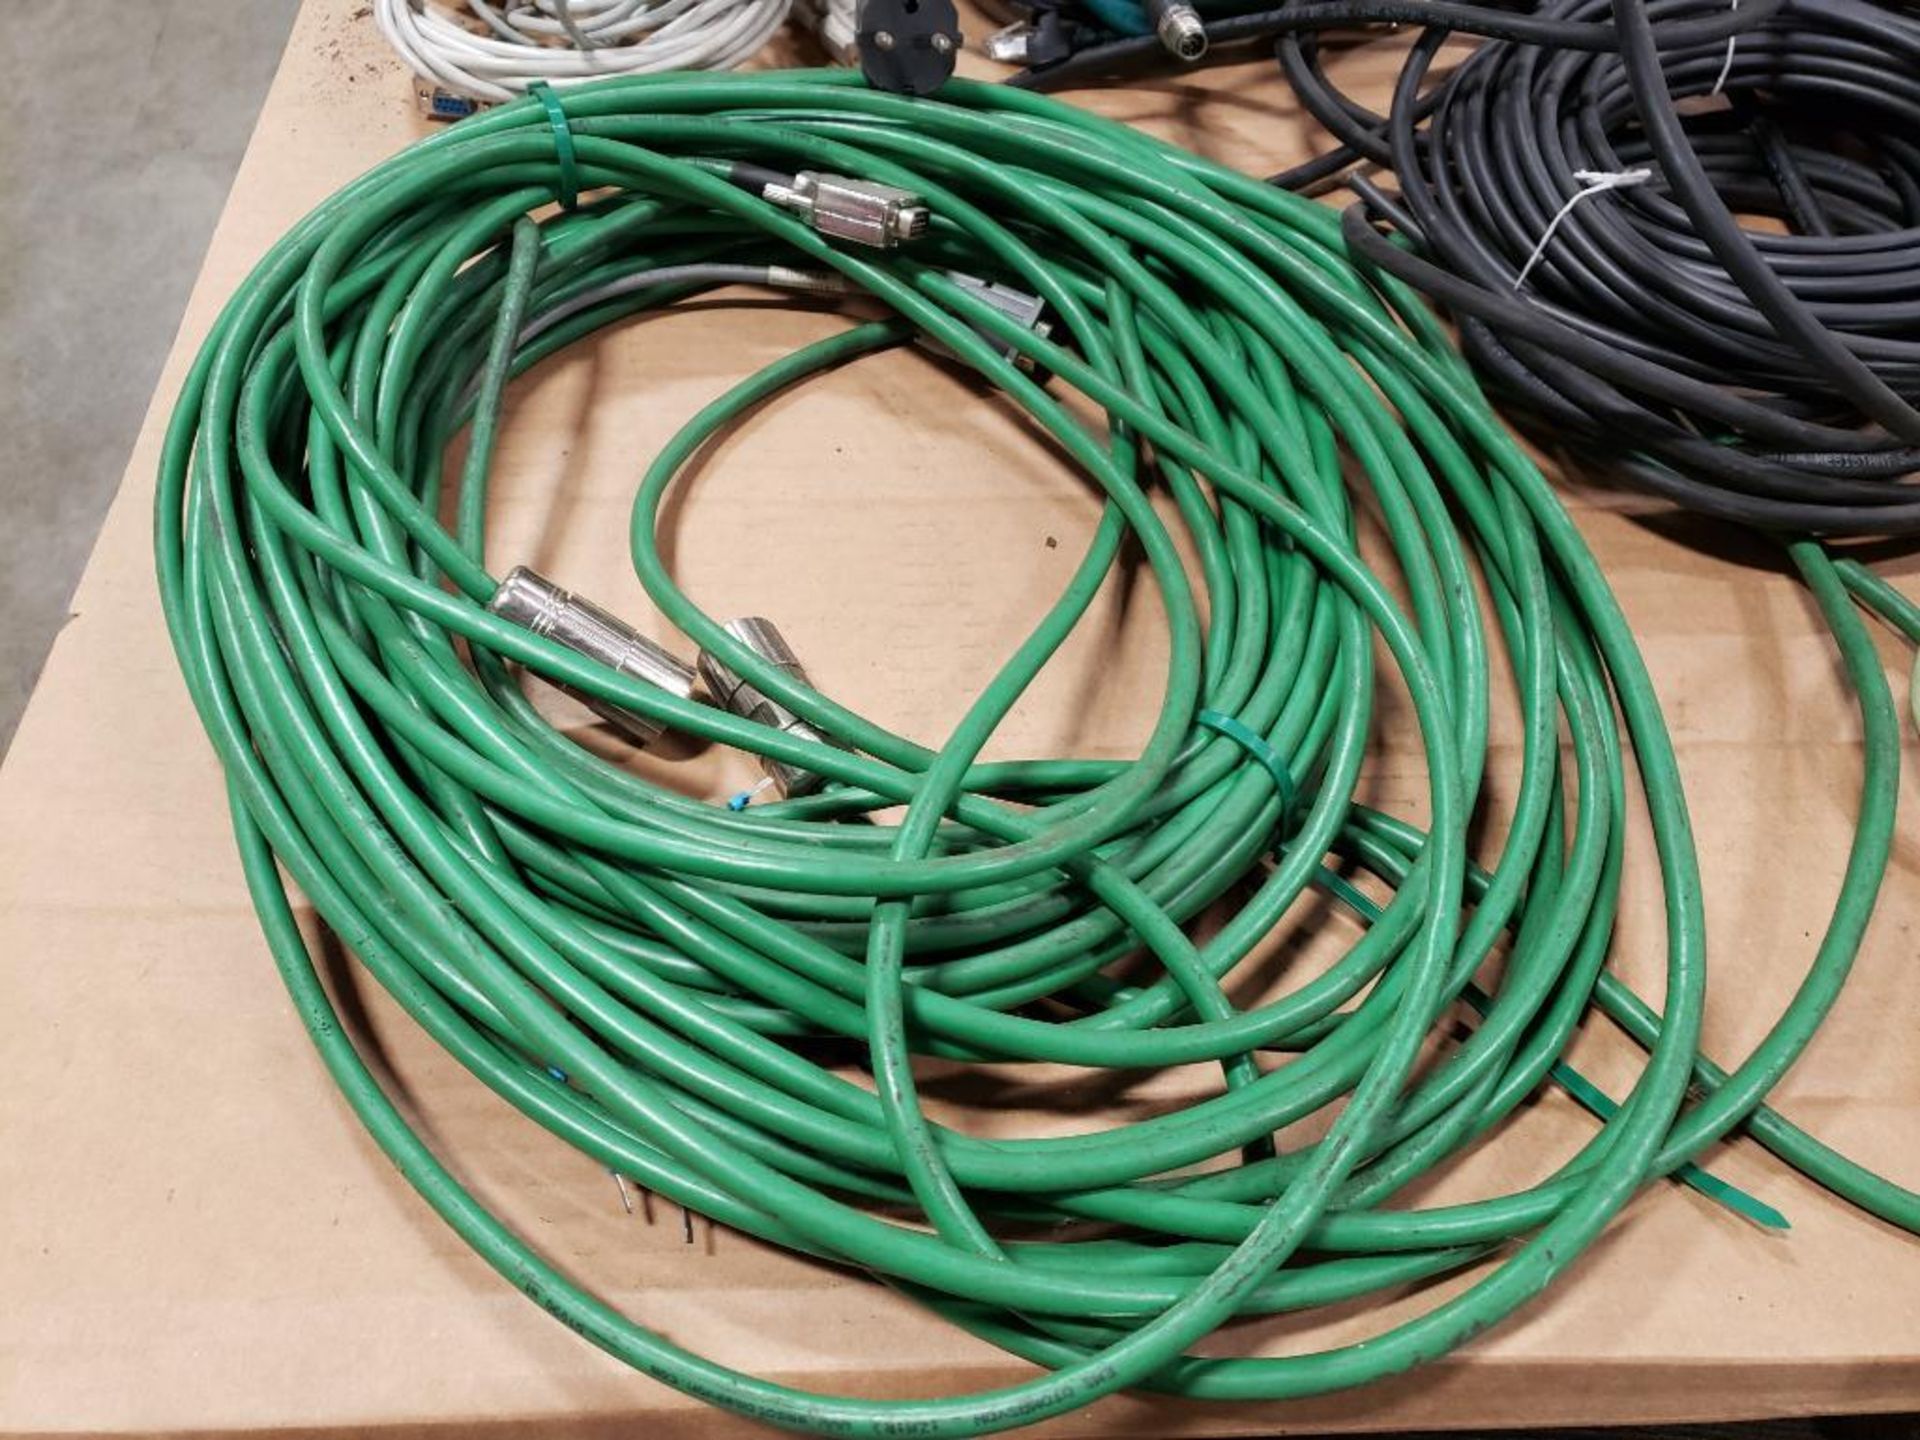 Pallet of assorted electrical connection wires. - Image 11 of 13